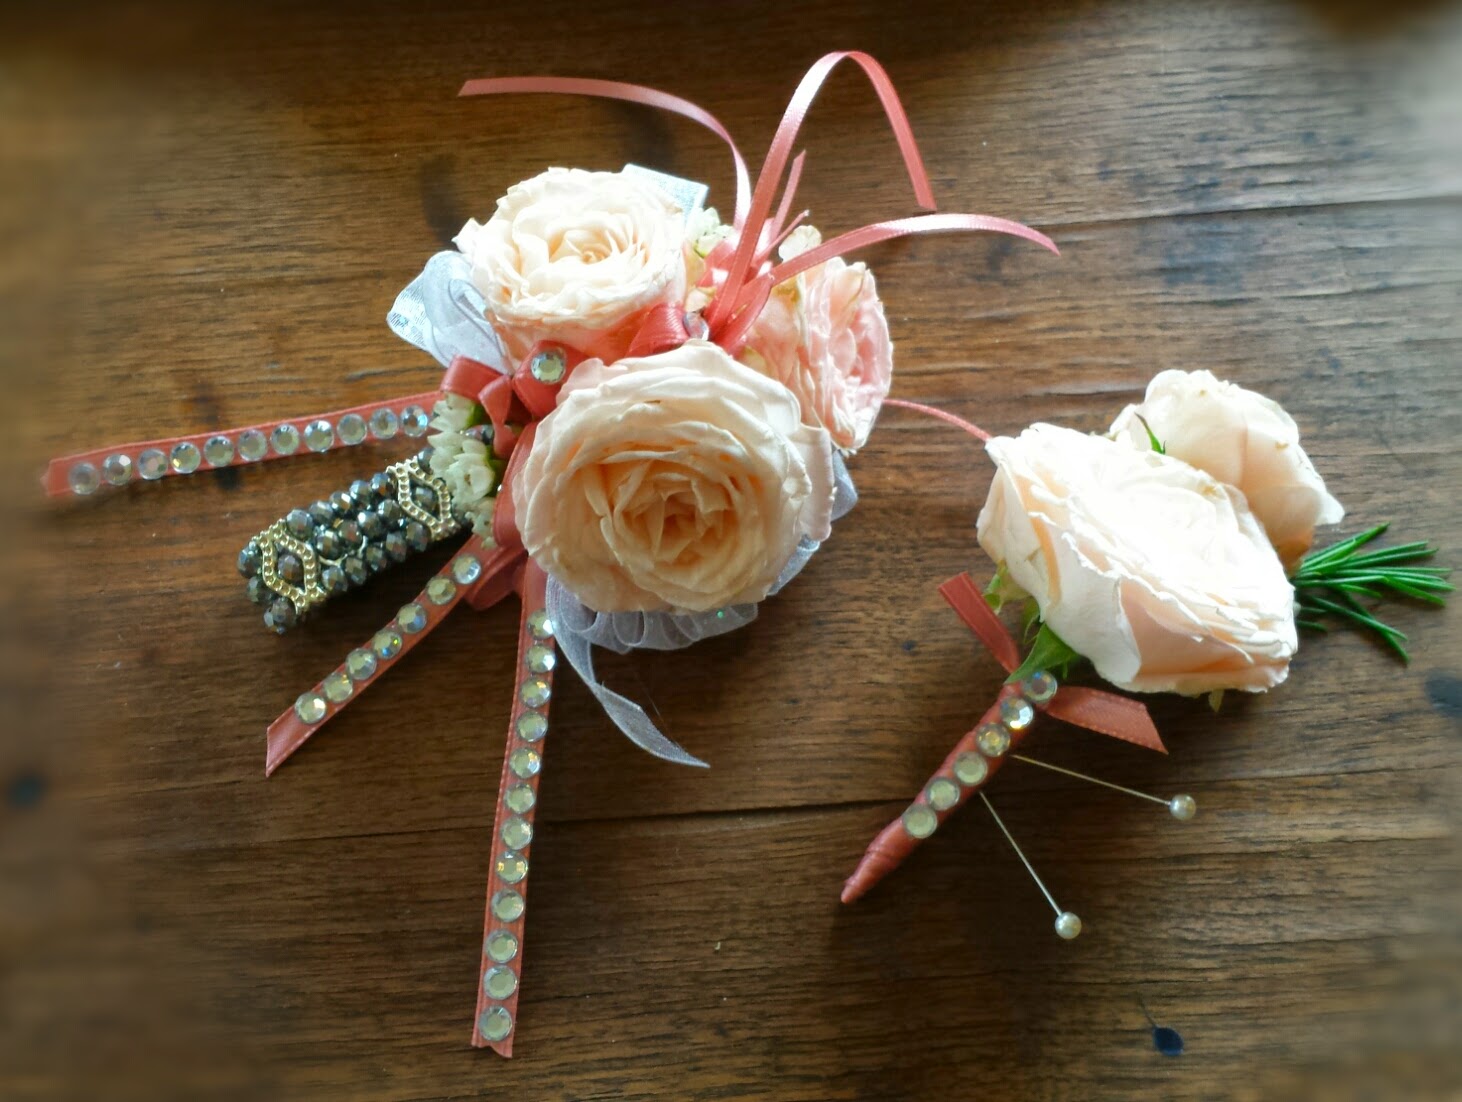 Prom '15 wrap up - Roses. Garden miniature rose corsage and boutonniere